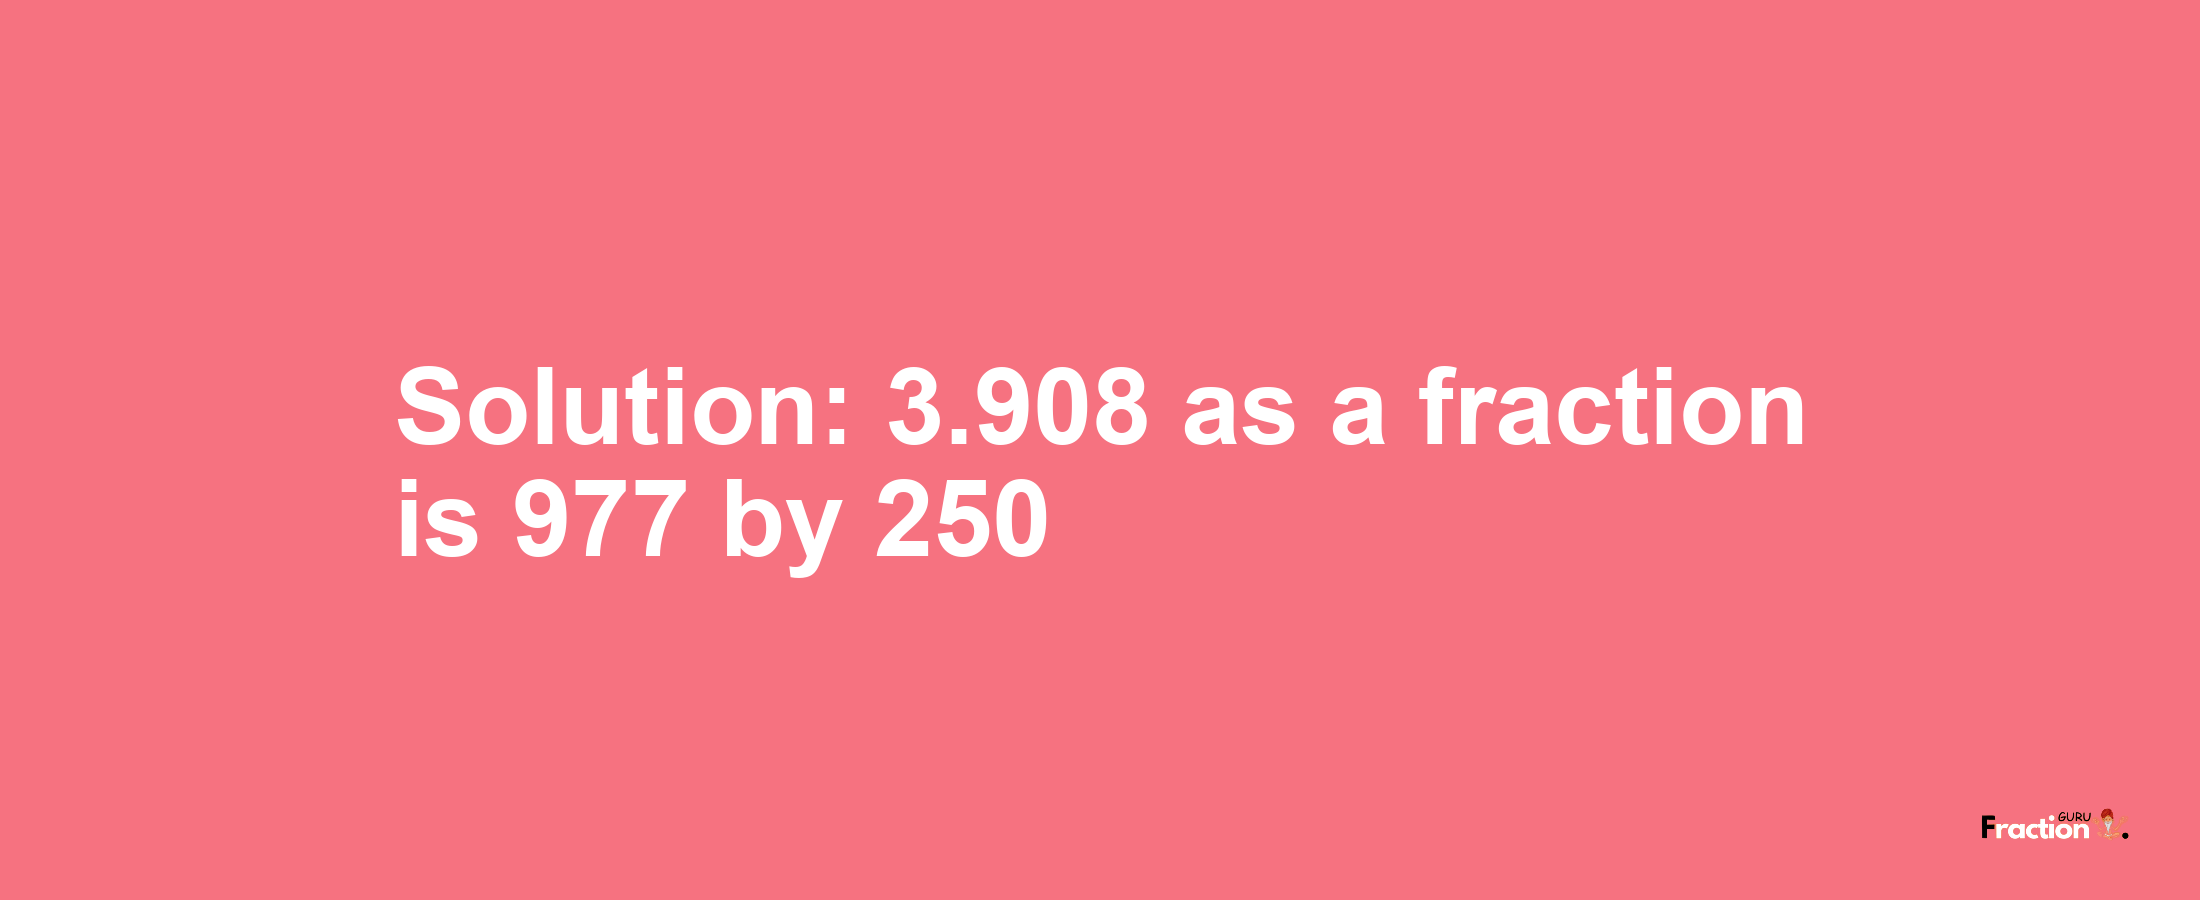 Solution:3.908 as a fraction is 977/250